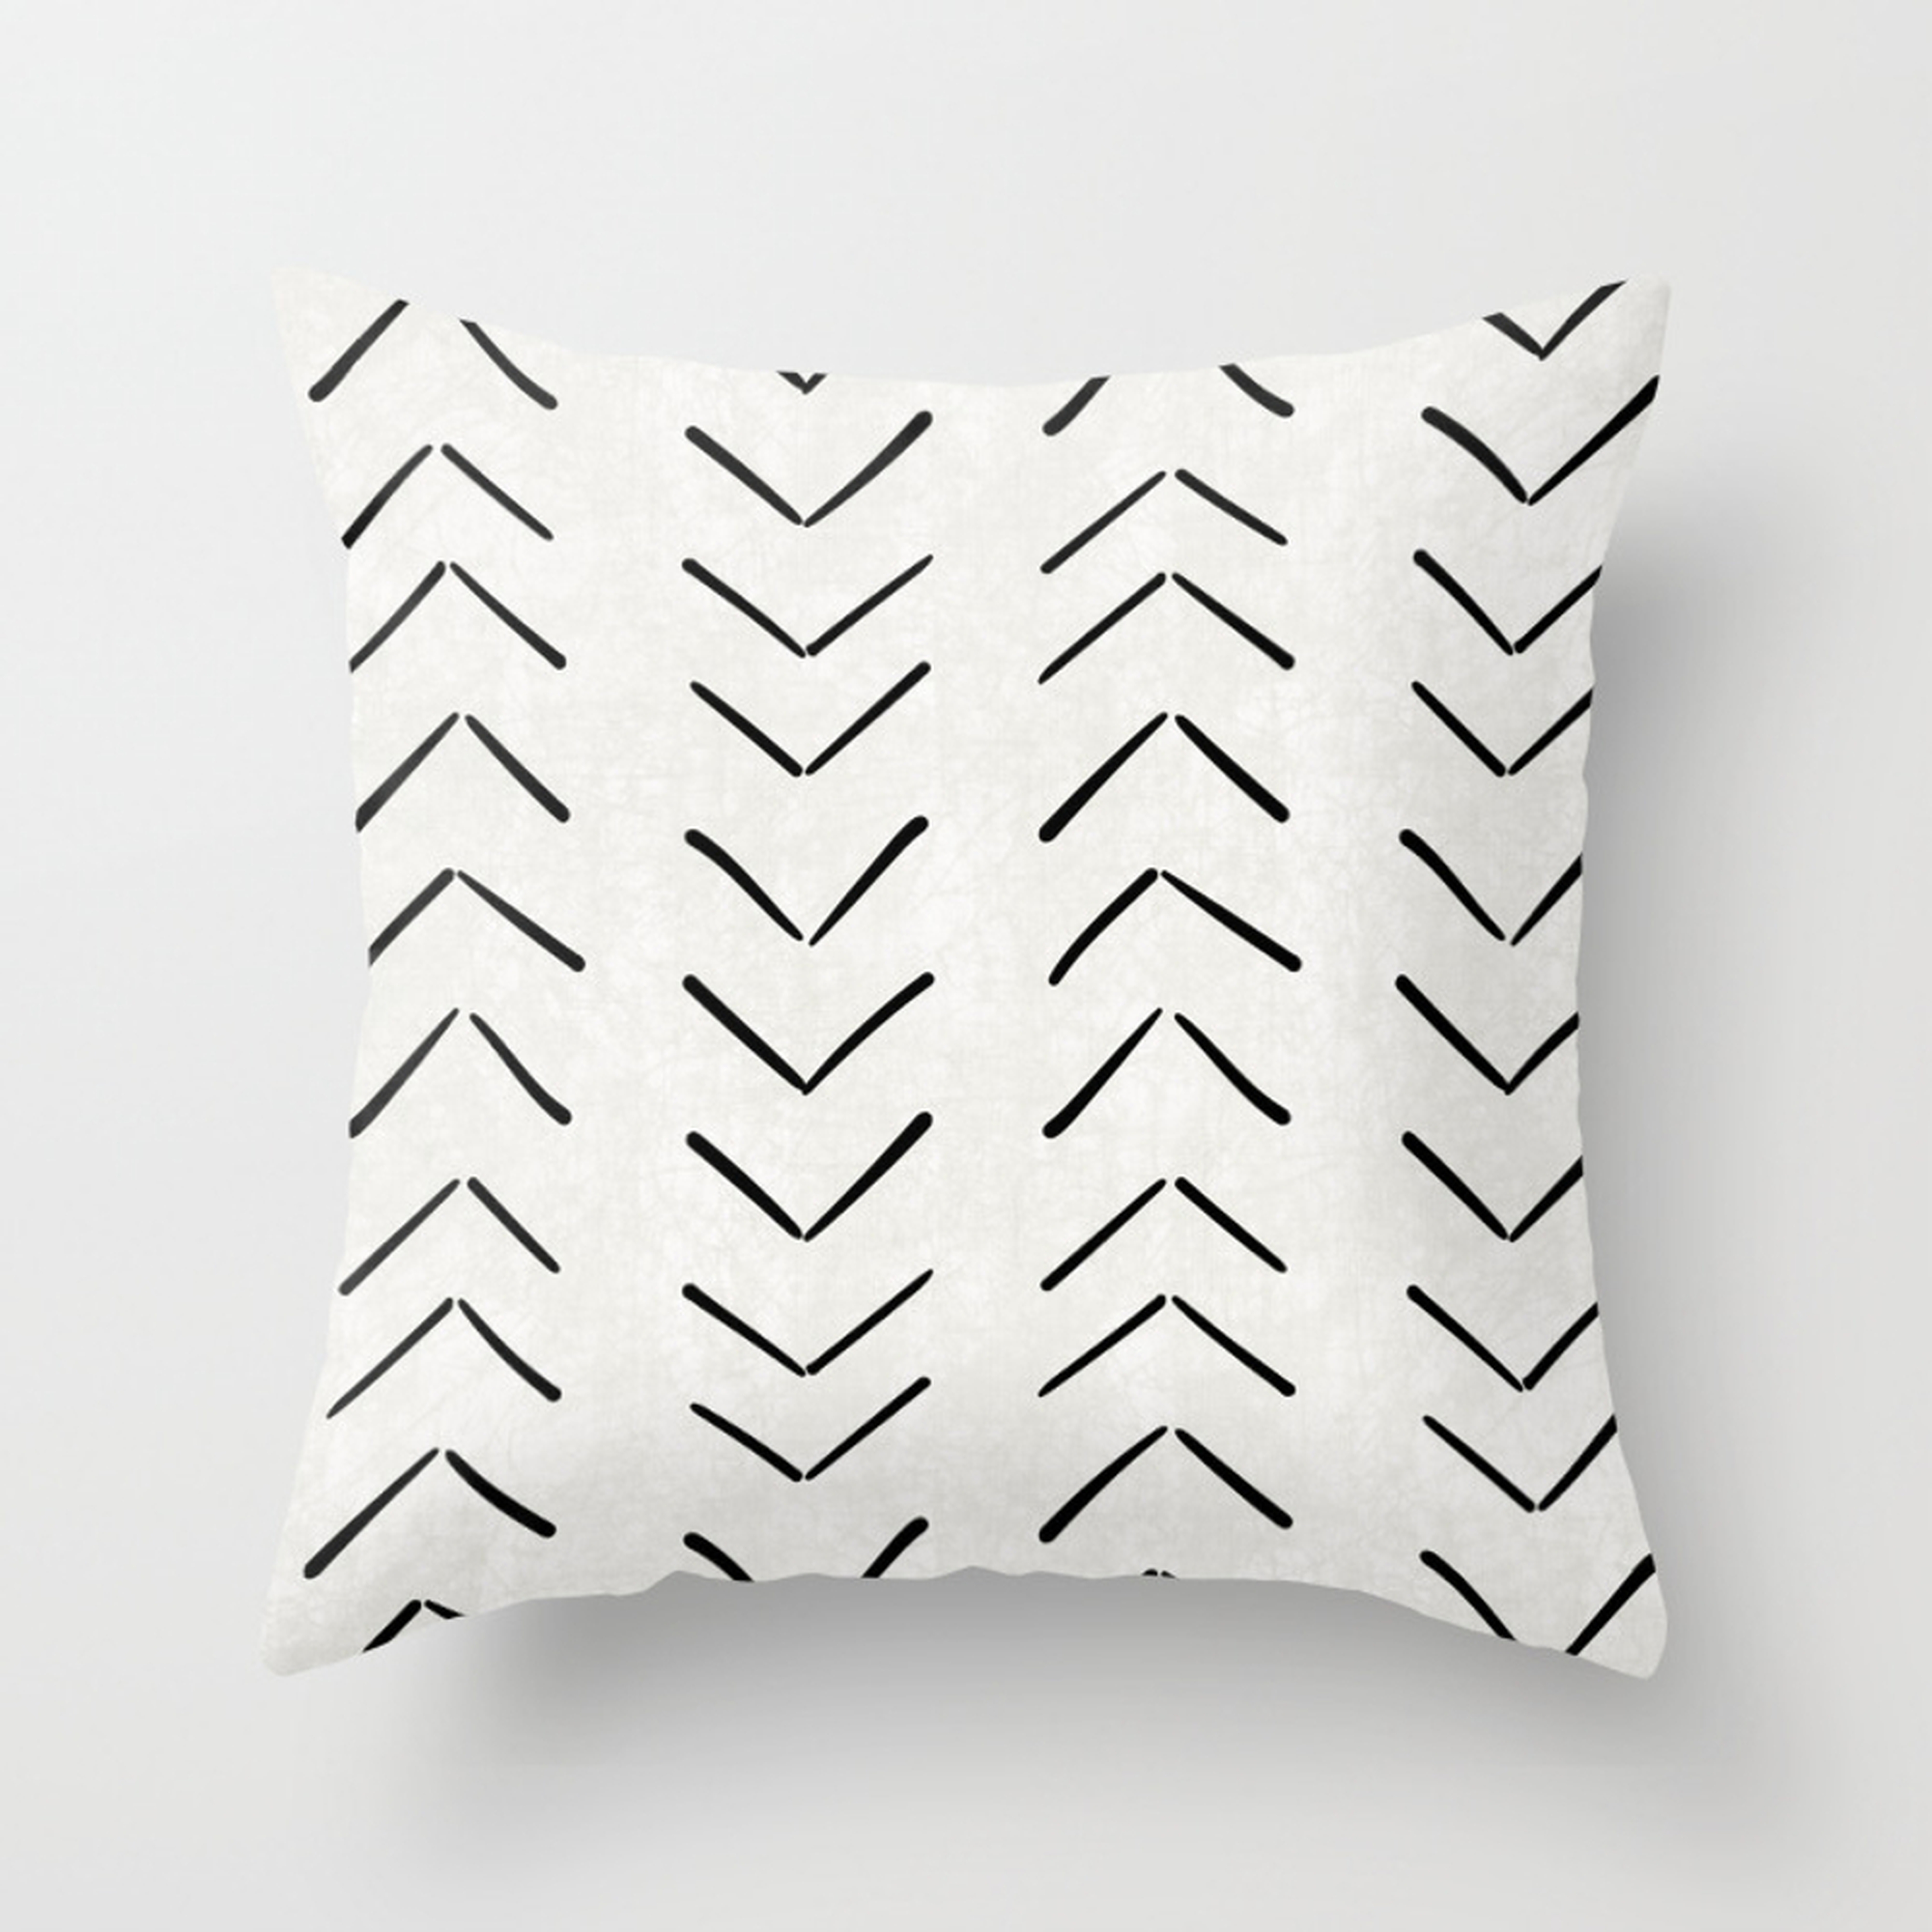 Mud Cloth Big Arrows in Cream Throw Pillow - Indoor Cover (20" x 20") with pillow insert by Beckybailey1 - Society6